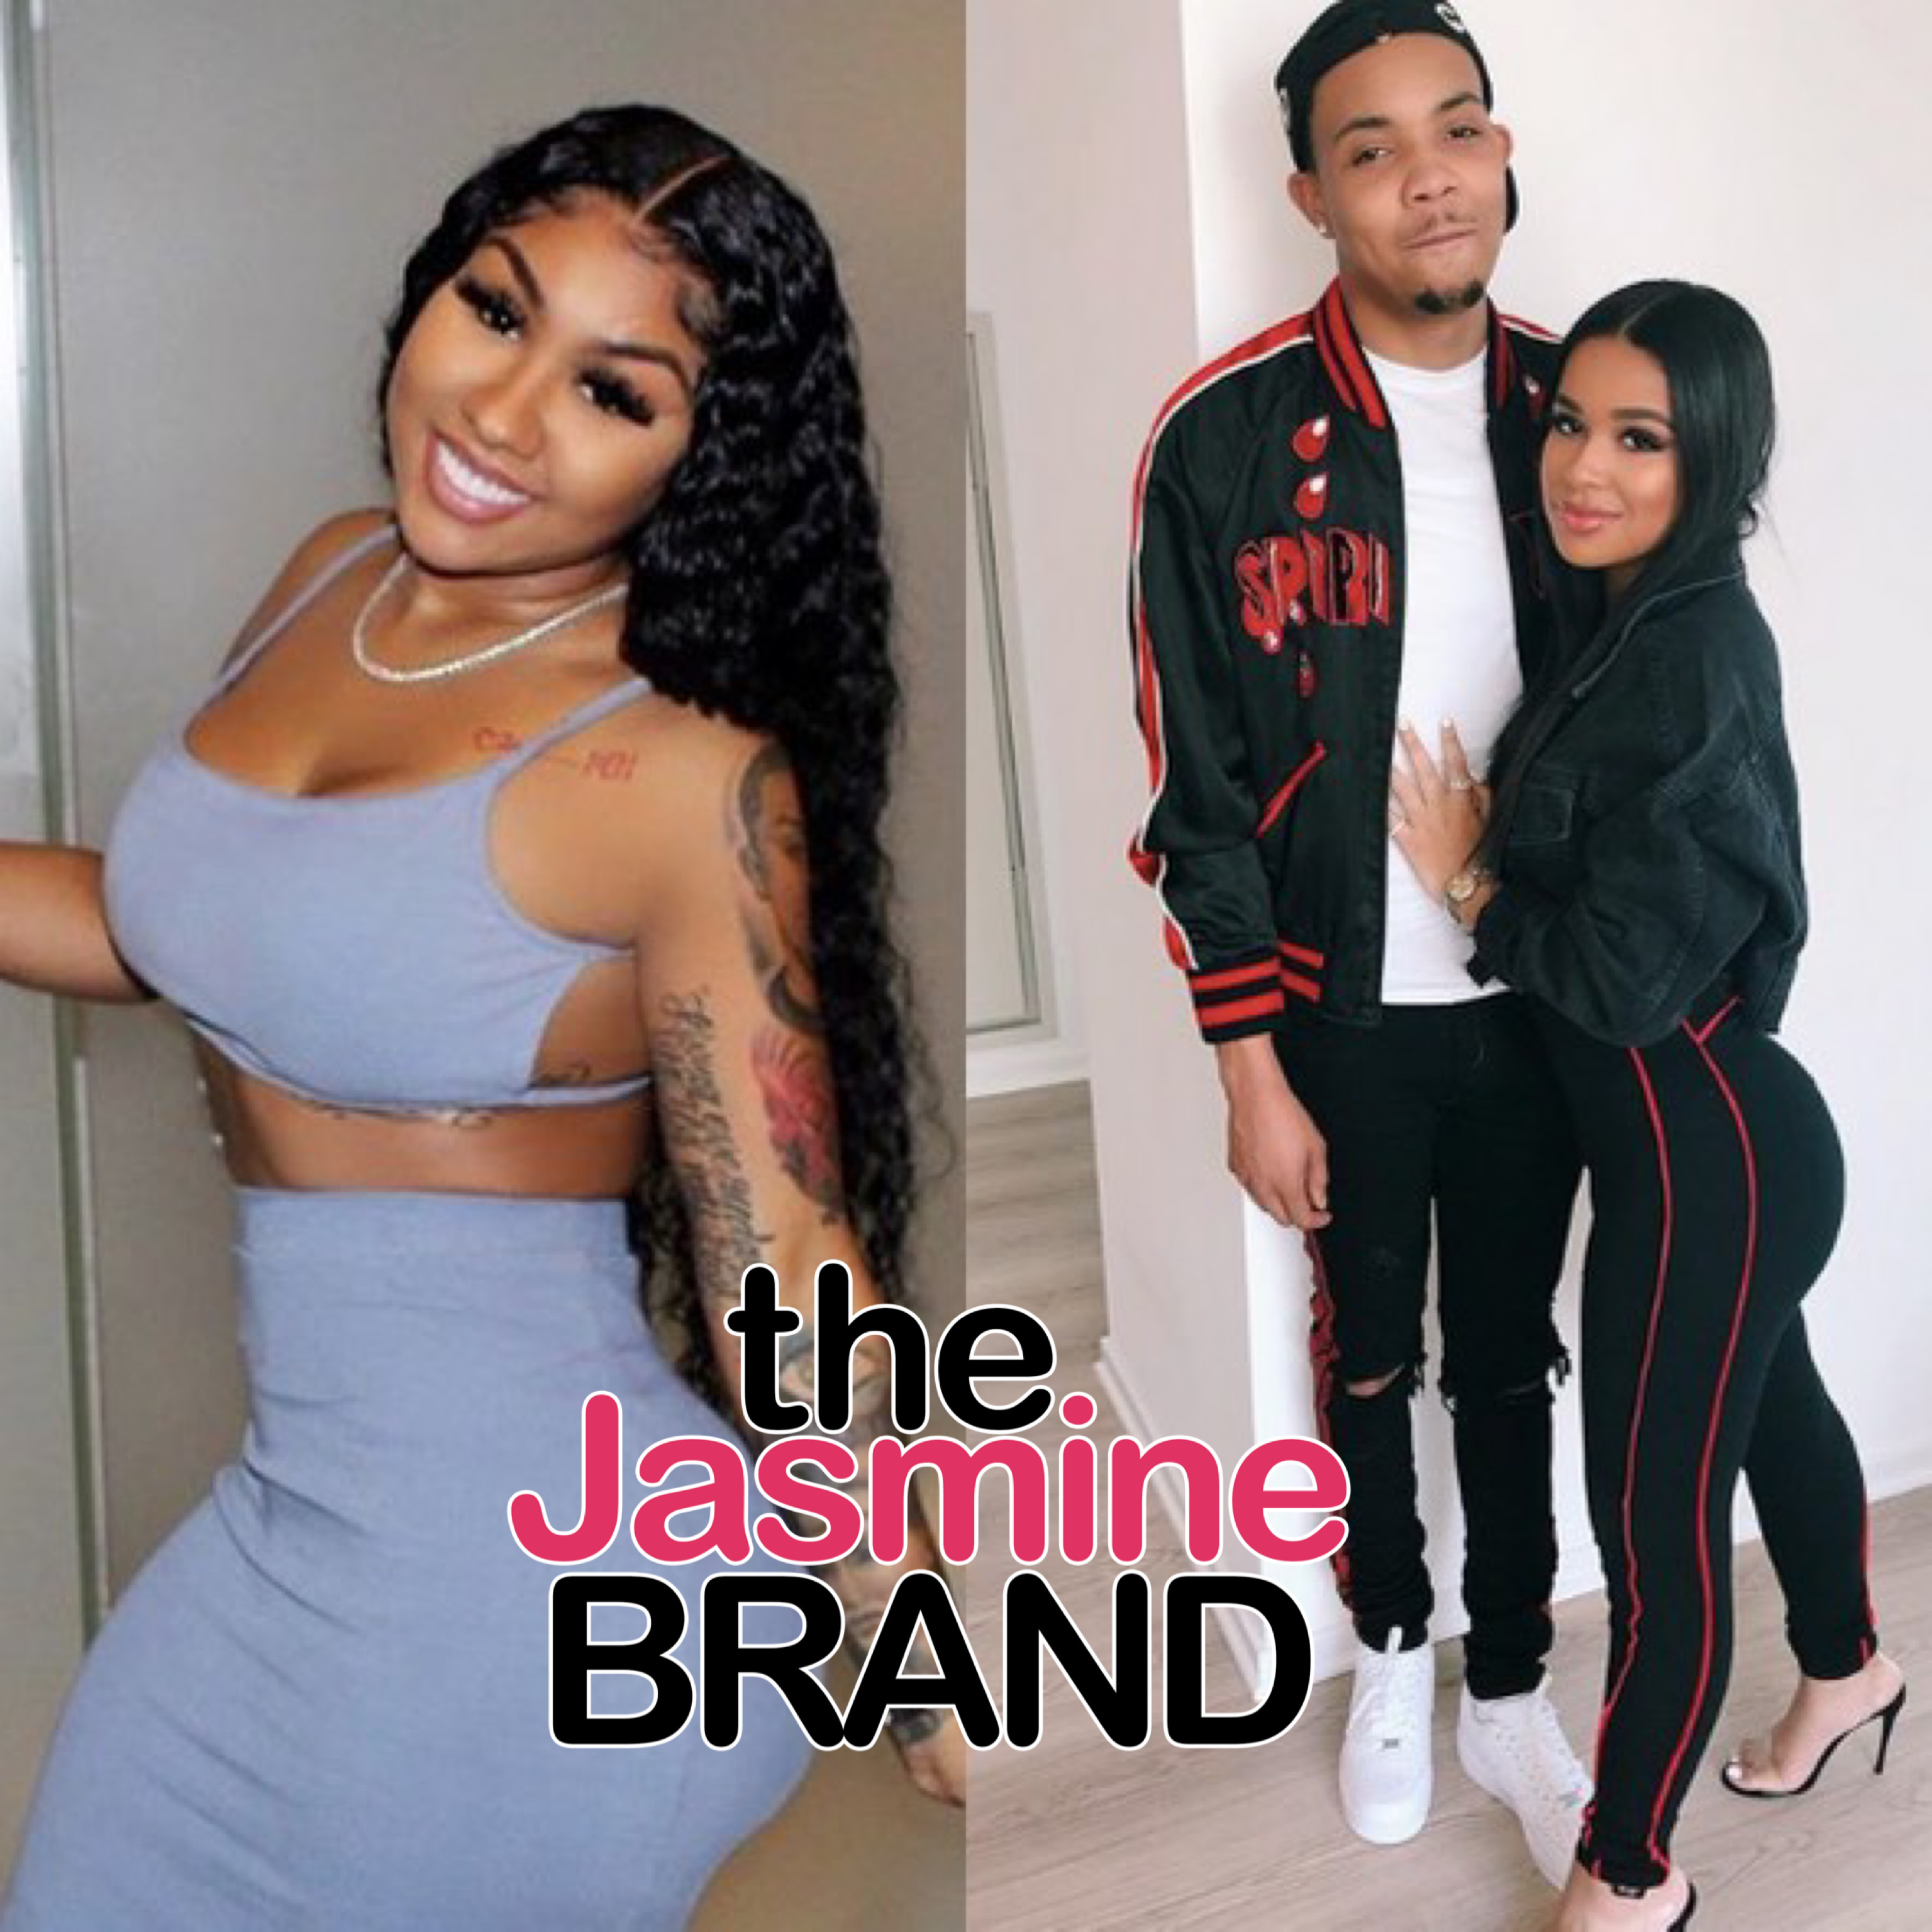 G Herbo Admits Cheating On His Ex Ari Fletcher, While She Suffered From Postpartum Depression, w